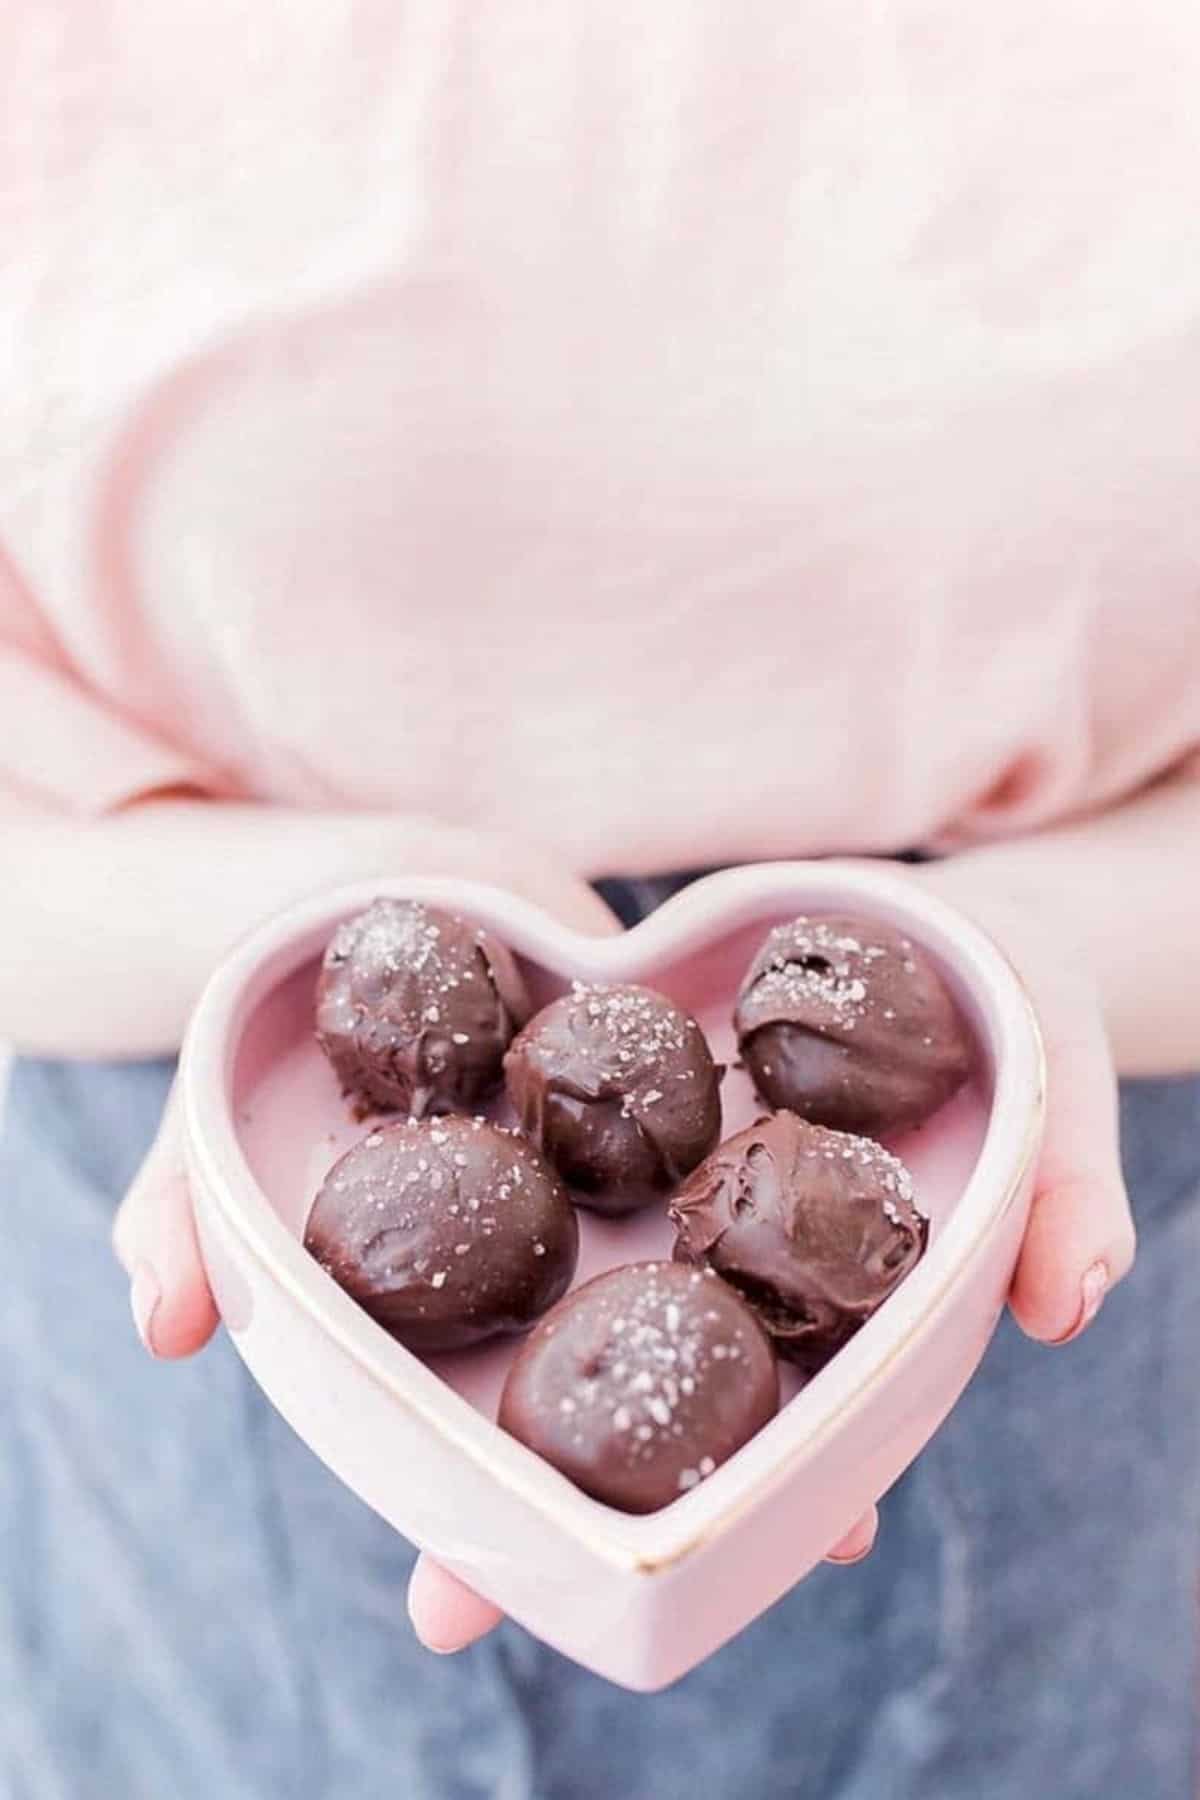 salted dark chocolate truffles in a heart shaped box being held by a woman